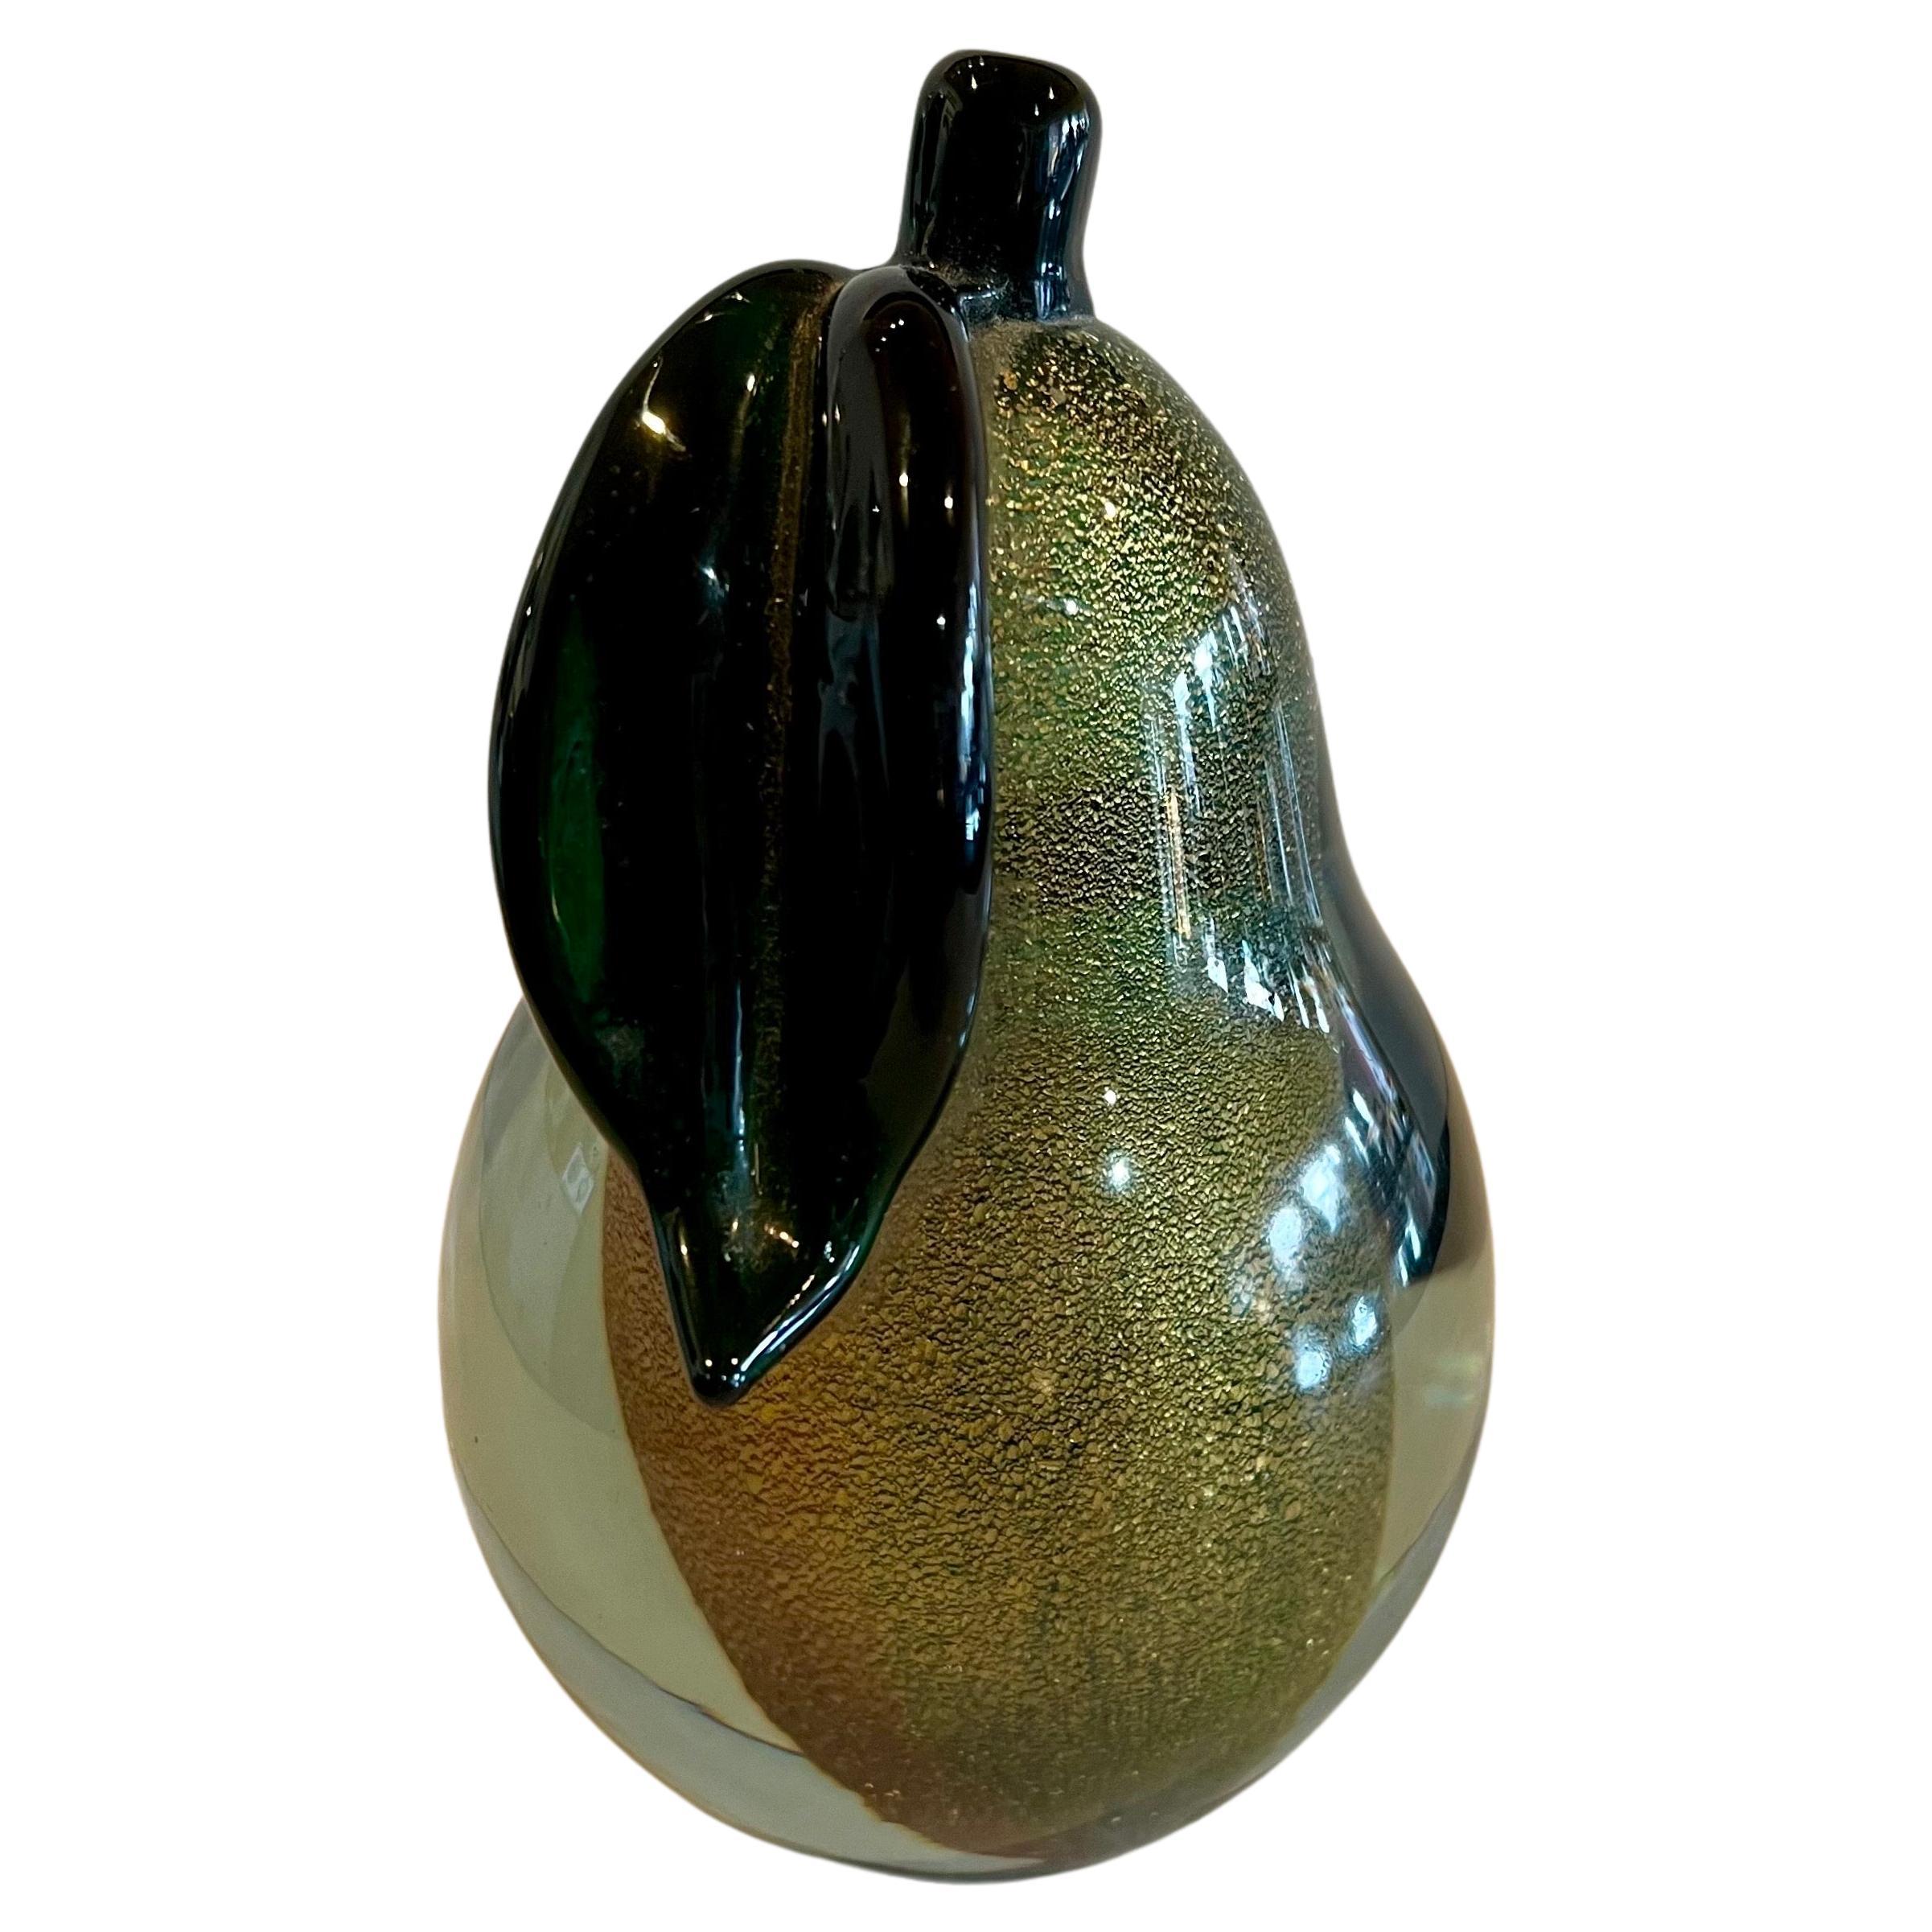 Archemide Seguso Murano Gold Sommerso Polvery Glass Bookend Sculpture In Excellent Condition For Sale In San Diego, CA